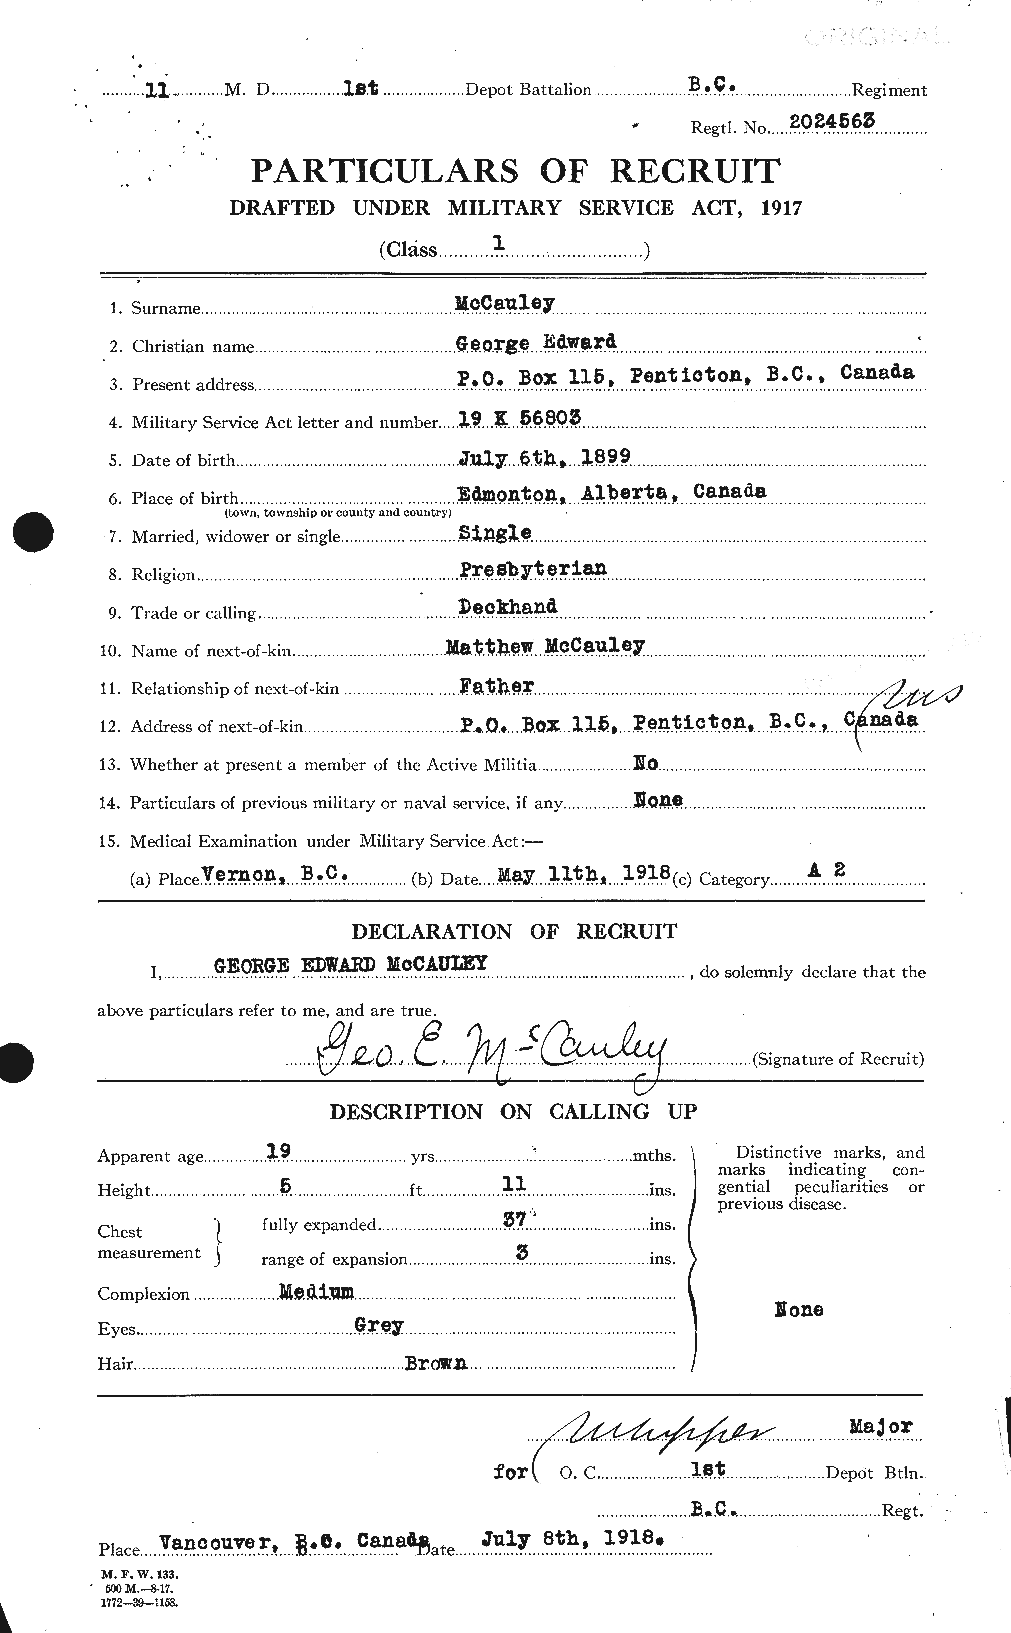 Personnel Records of the First World War - CEF 133130a